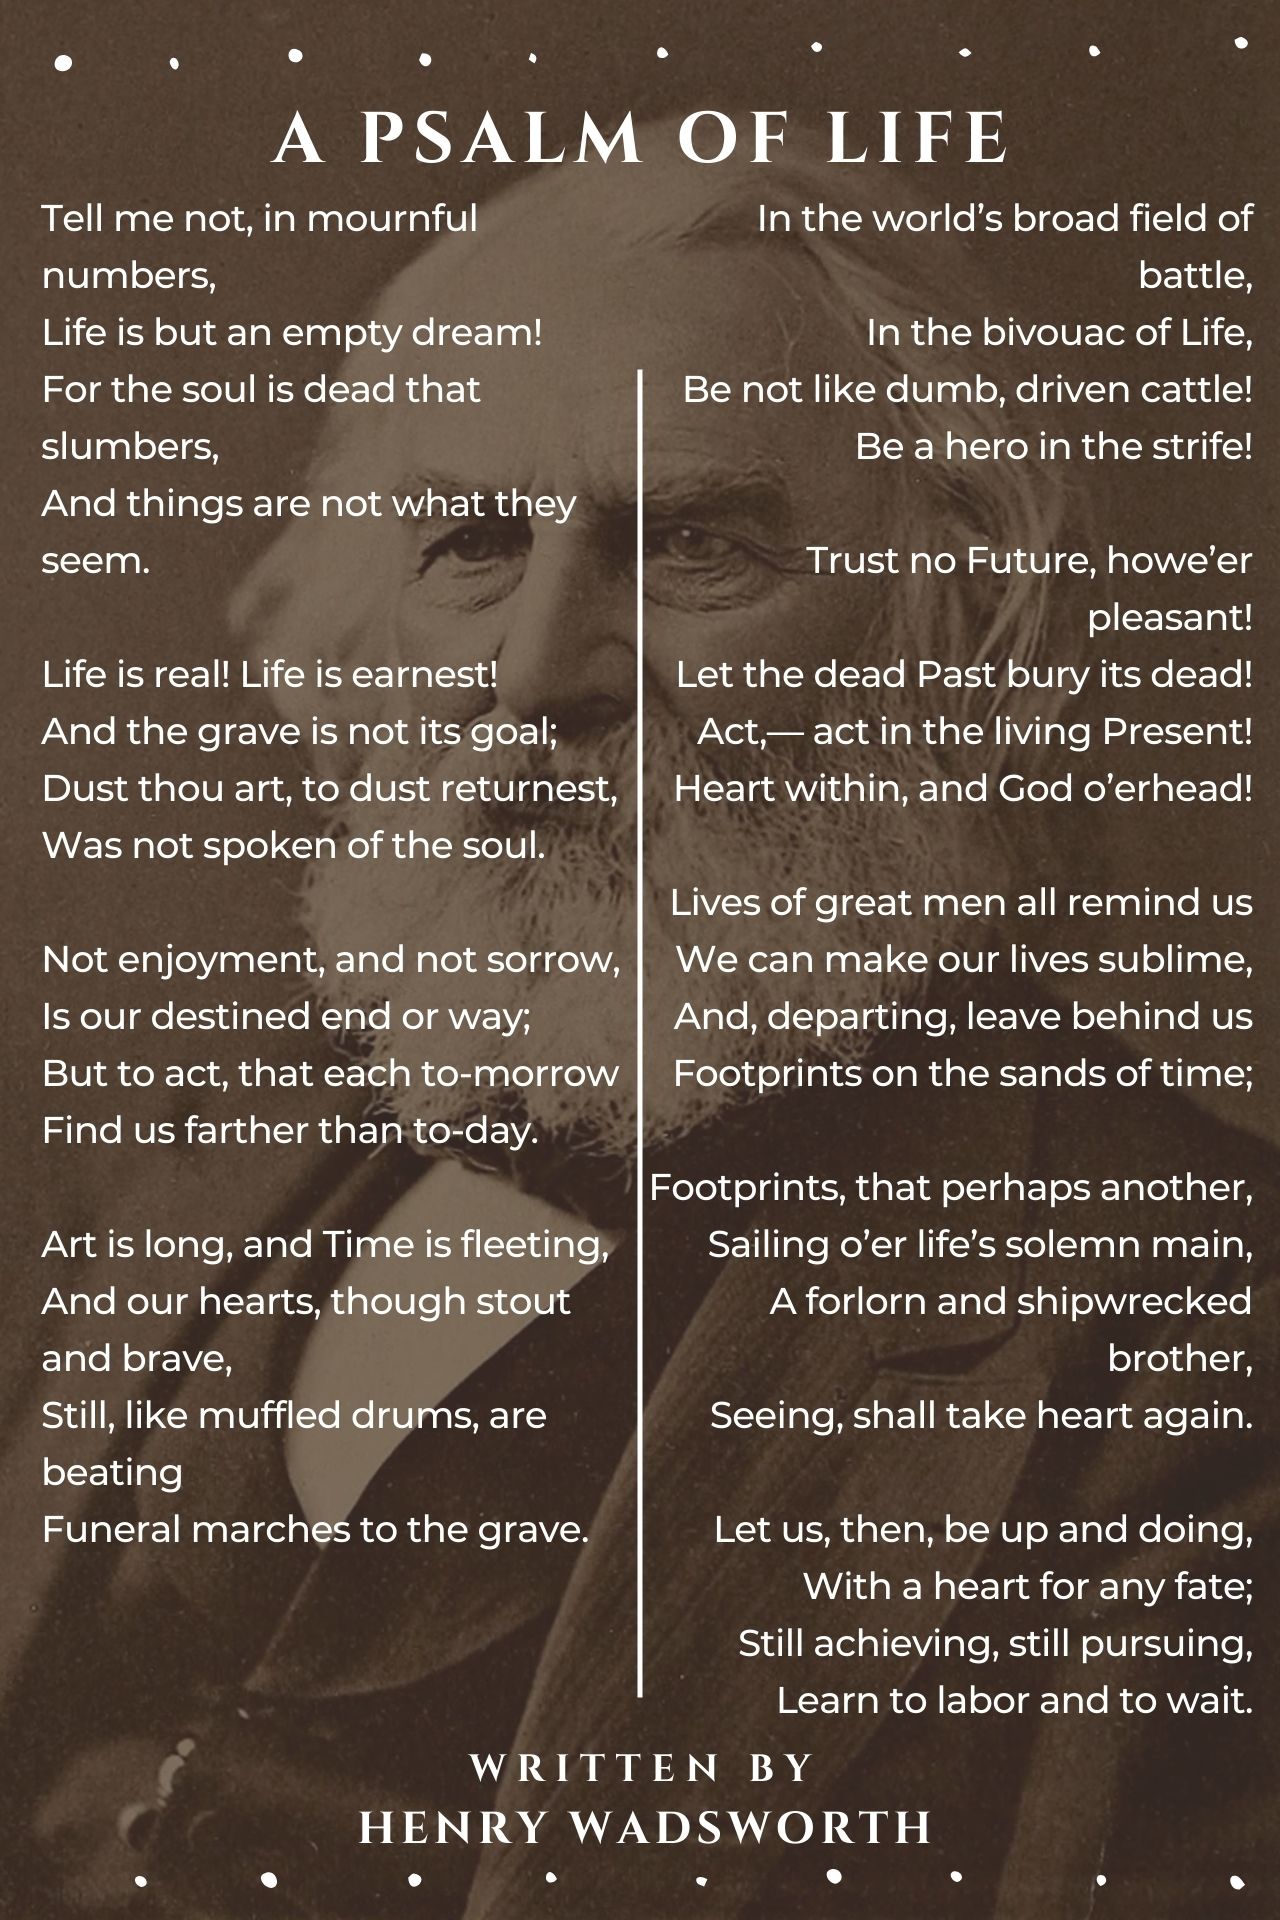 A Psalm Of Life - A Psalm Of Life Poem by Henry Wadsworth Longfellow